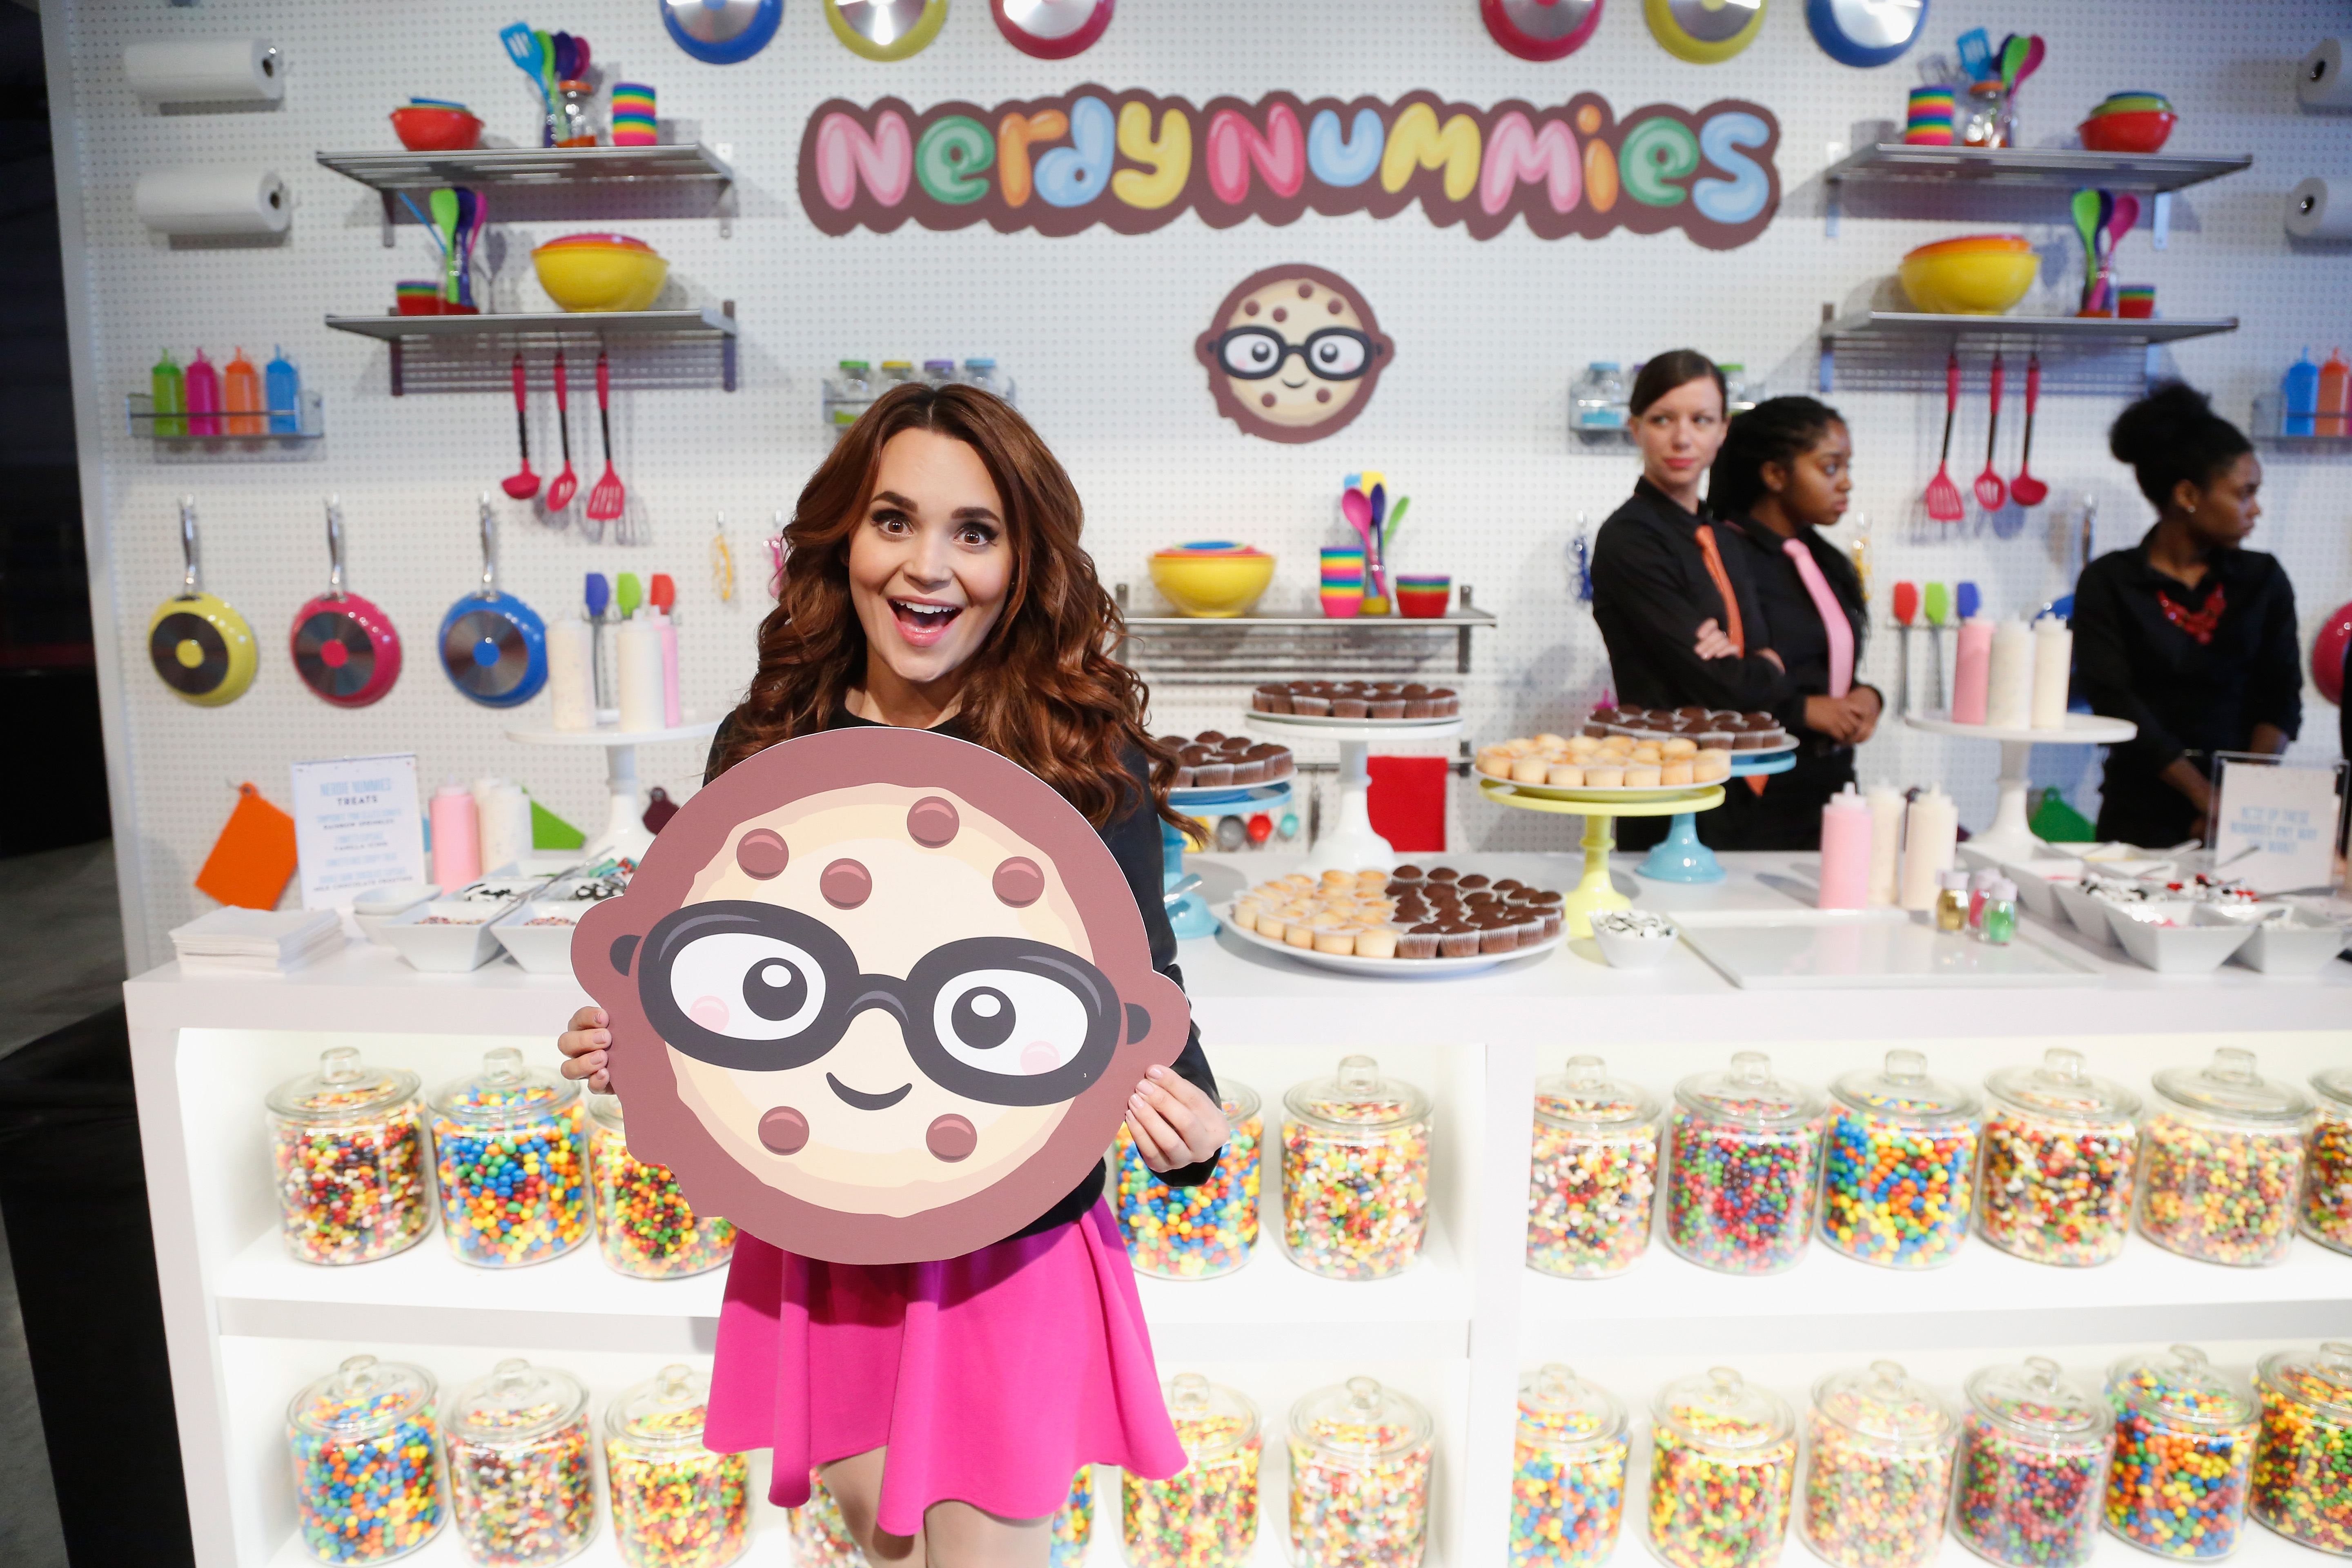 Rosanna Pansino Risked Her Life Savings on Baking Videos. Now She’s One of YouTube’s Highest-Paid Stars